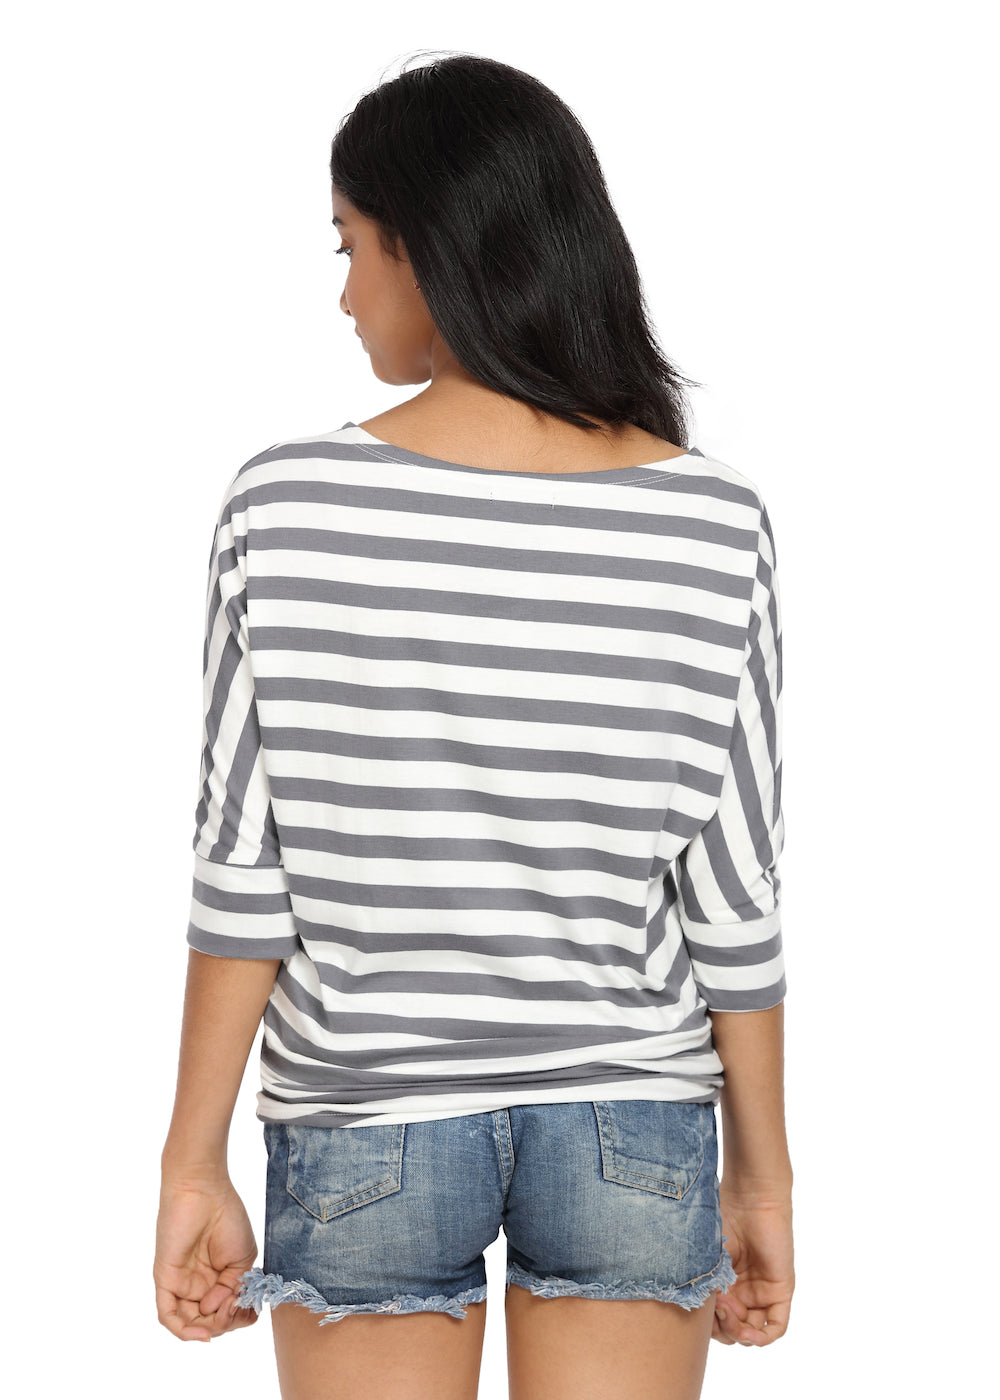 Striped Knit Top with a Knot Grey & White Boat Neck - GENZEE